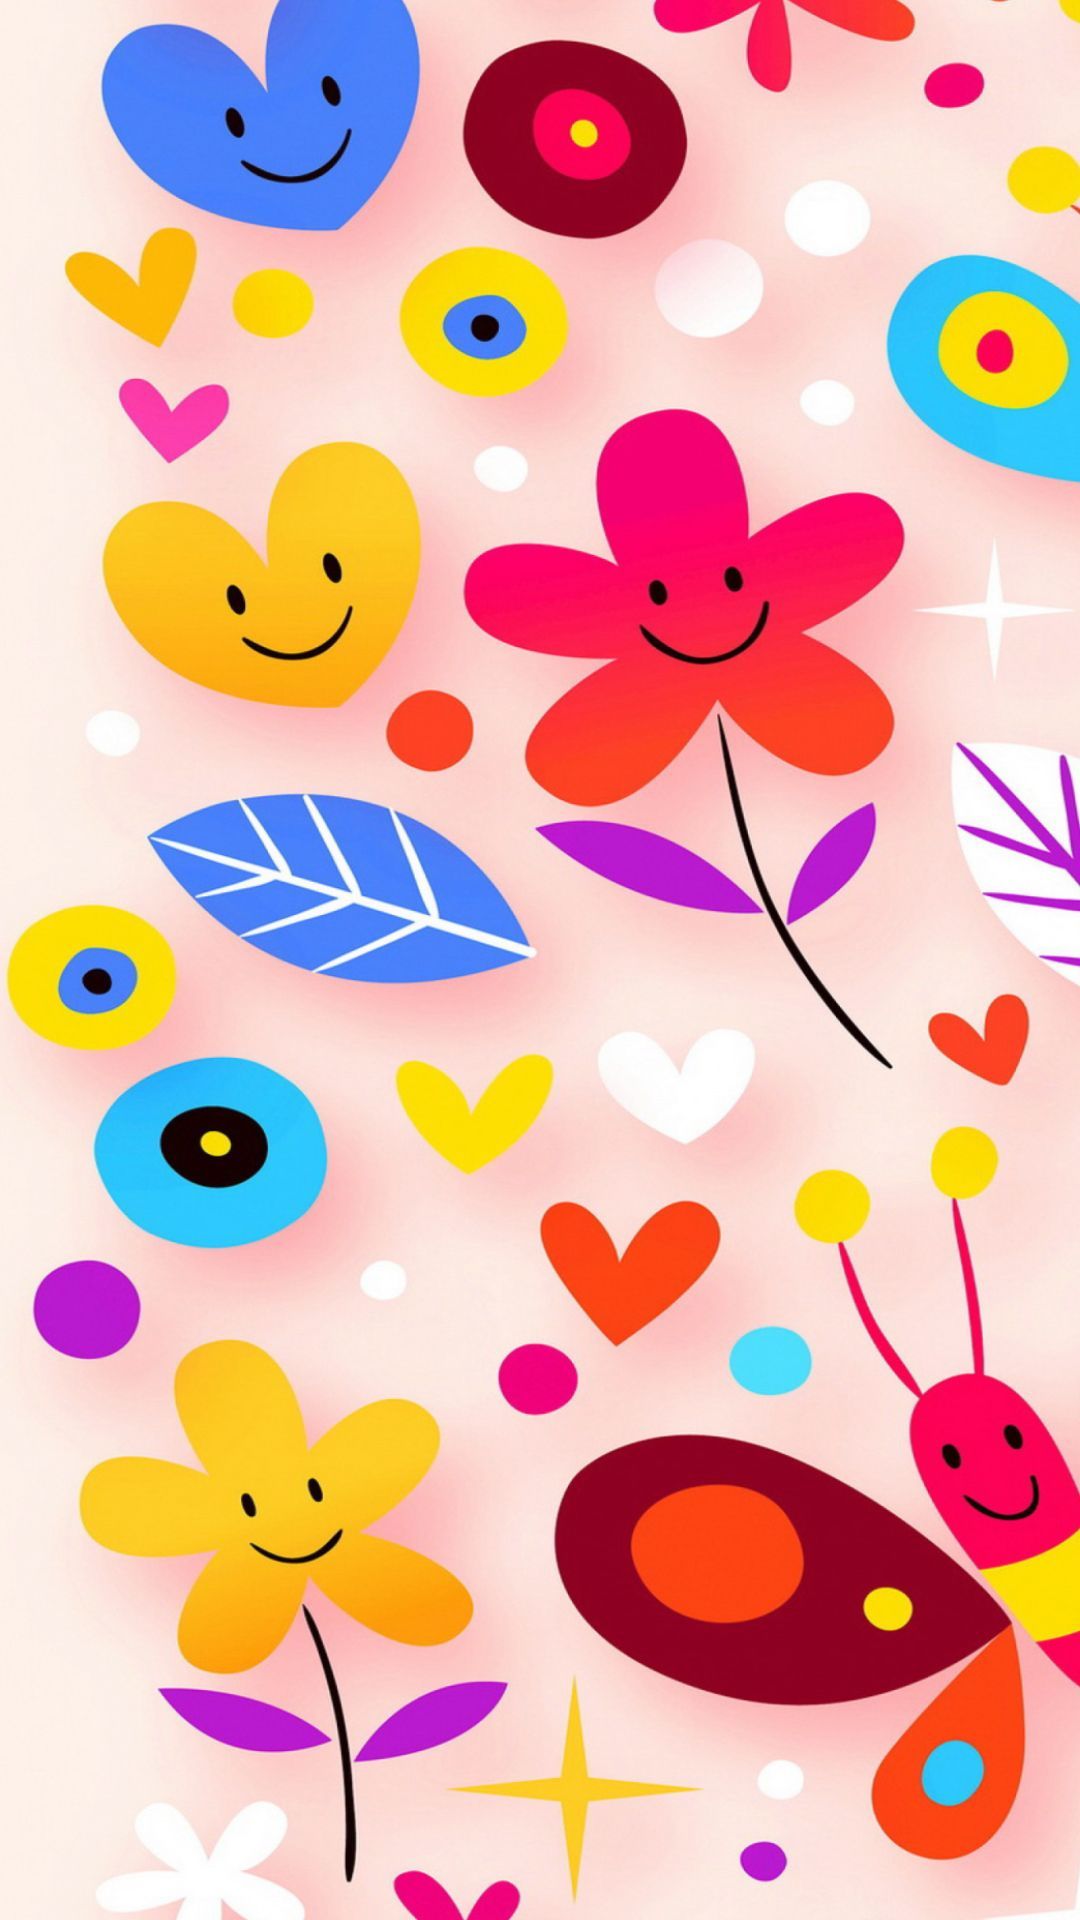 Pattern to see more cute cartoon wallpaper! - Cute cartoon wallpaper, Cartoon wallpaper, Flower wallpaper